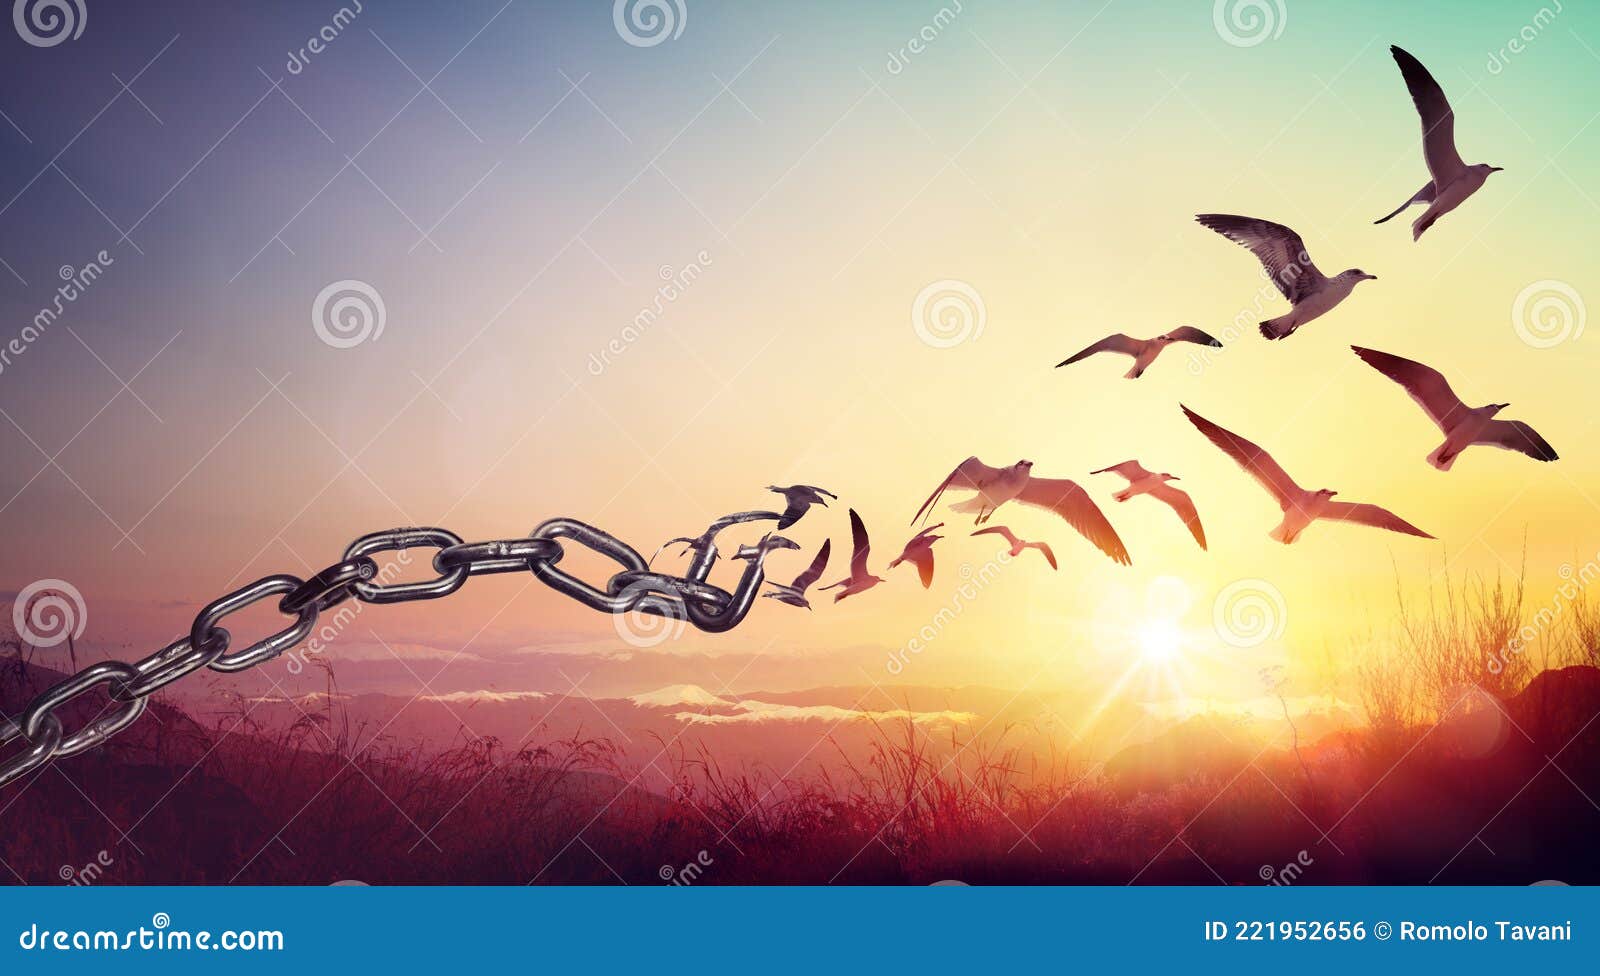 freedom - chains that transform into birds